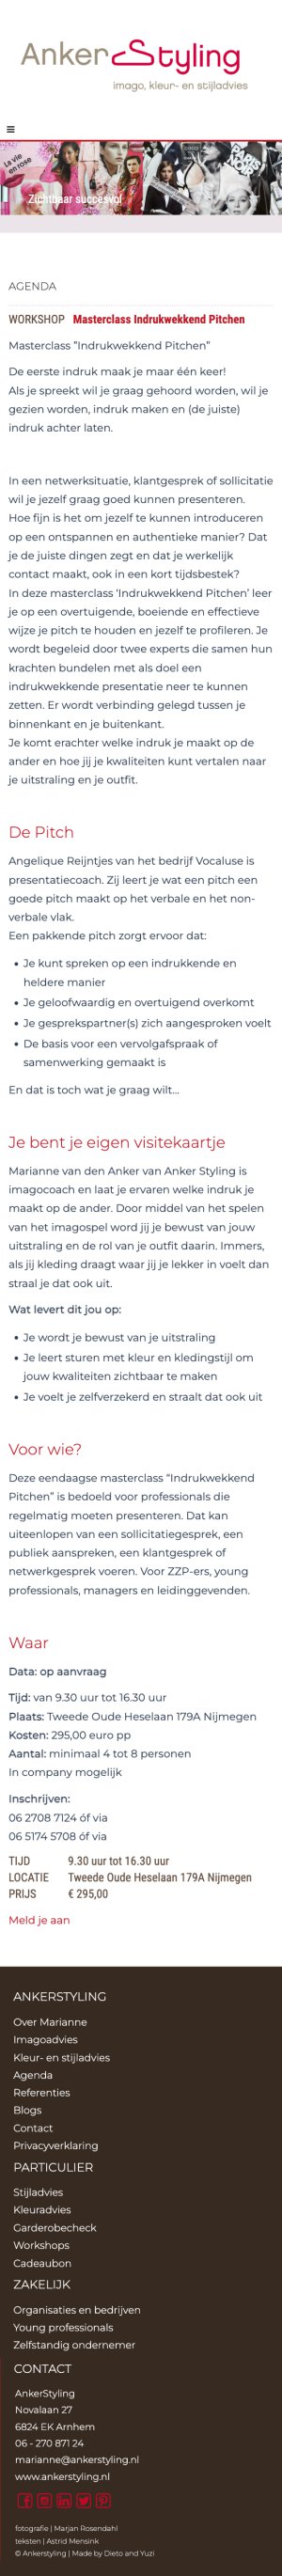 Website Ankerstyling